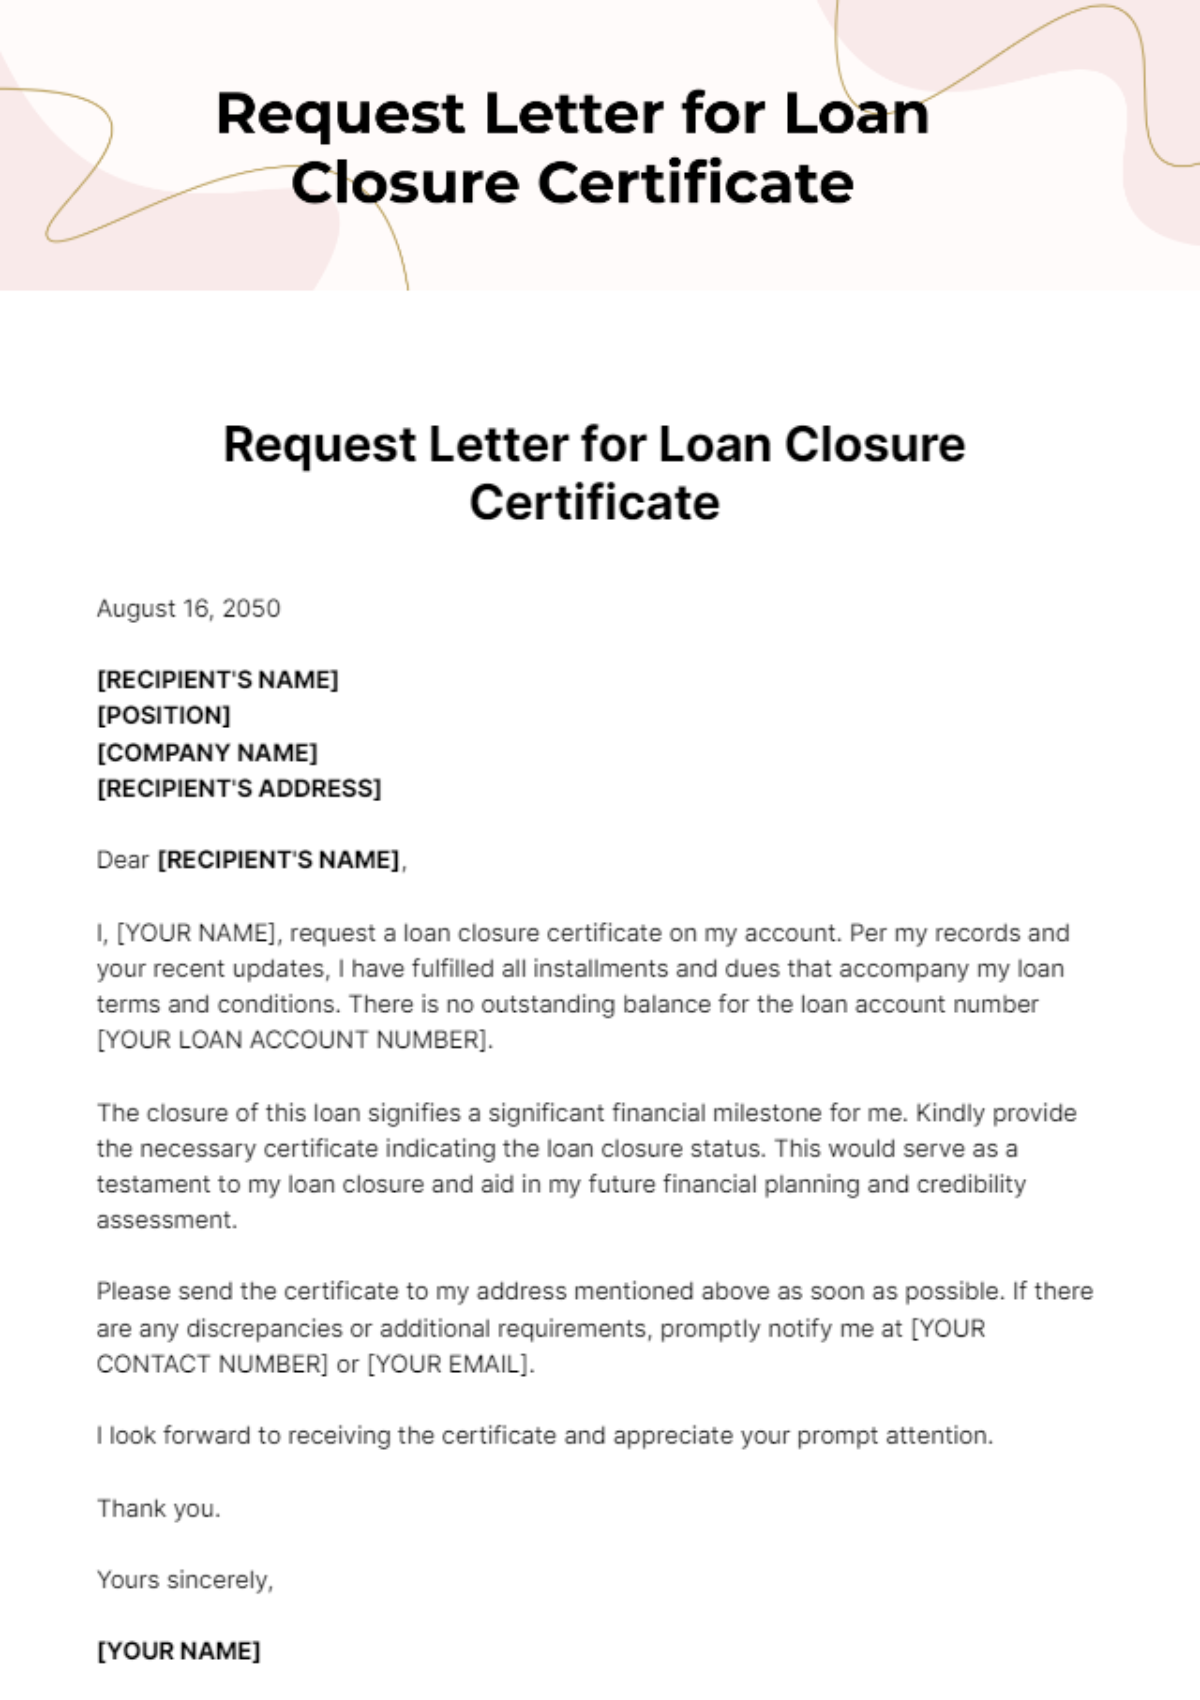 Free Request Letter for Loan Closure Certificate Template